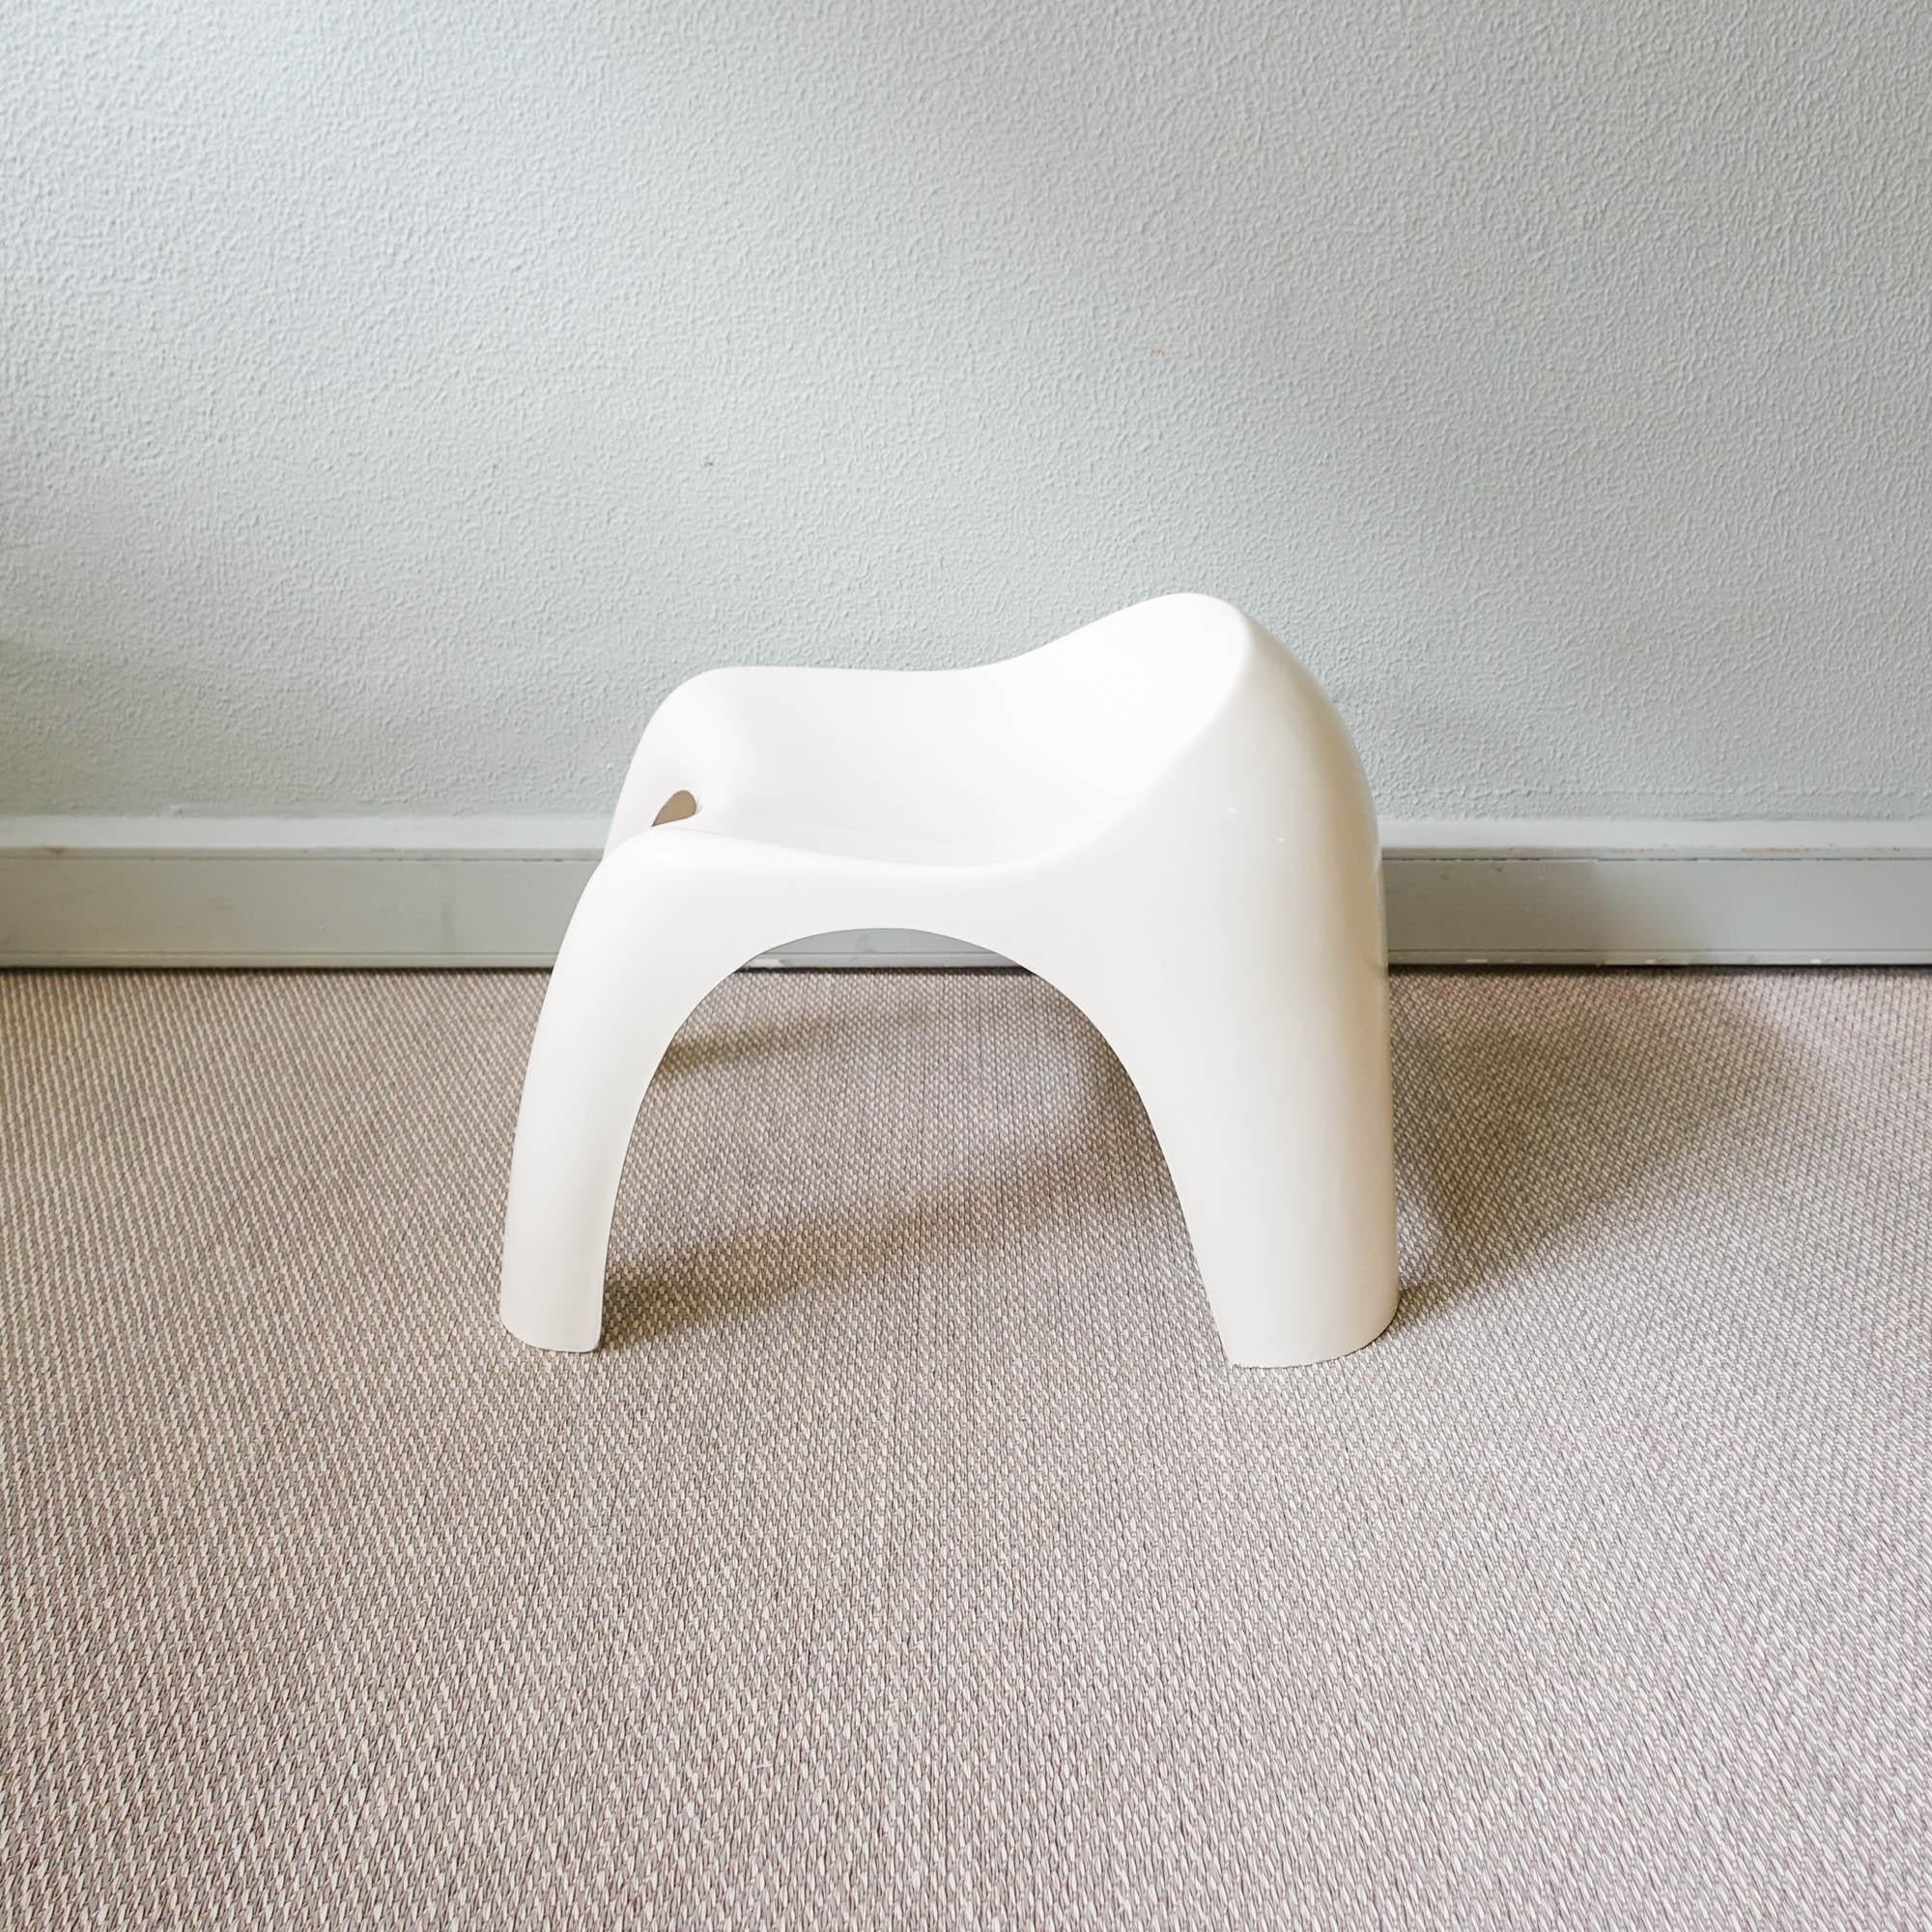 This stool was designed and produced in Portugal, during the 1970's, in the style of Efebino stool by Stacy Dukes for Artemide. It is made of white fiberglass and it is in original and good vintage condition.